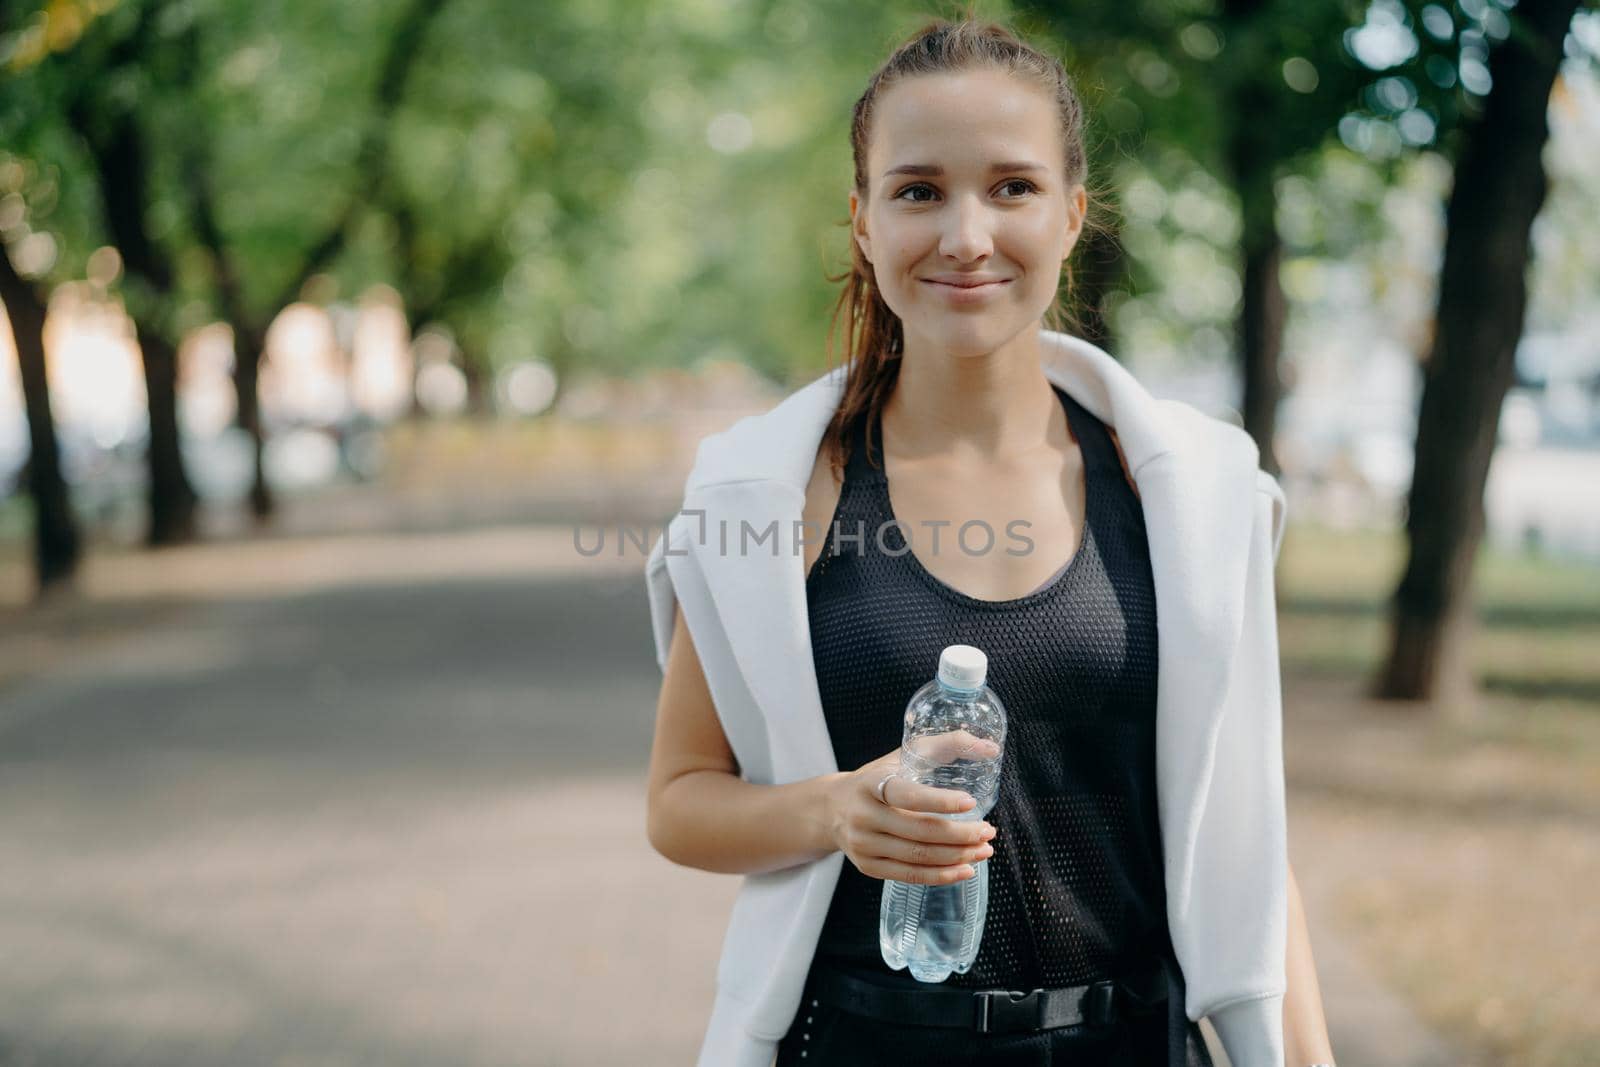 young female runner holds water bottle poses outdoor in active wear takes break after workout walks in park gets refreshment after jogging feels thirsty keeps fit with regular sport by vkstock